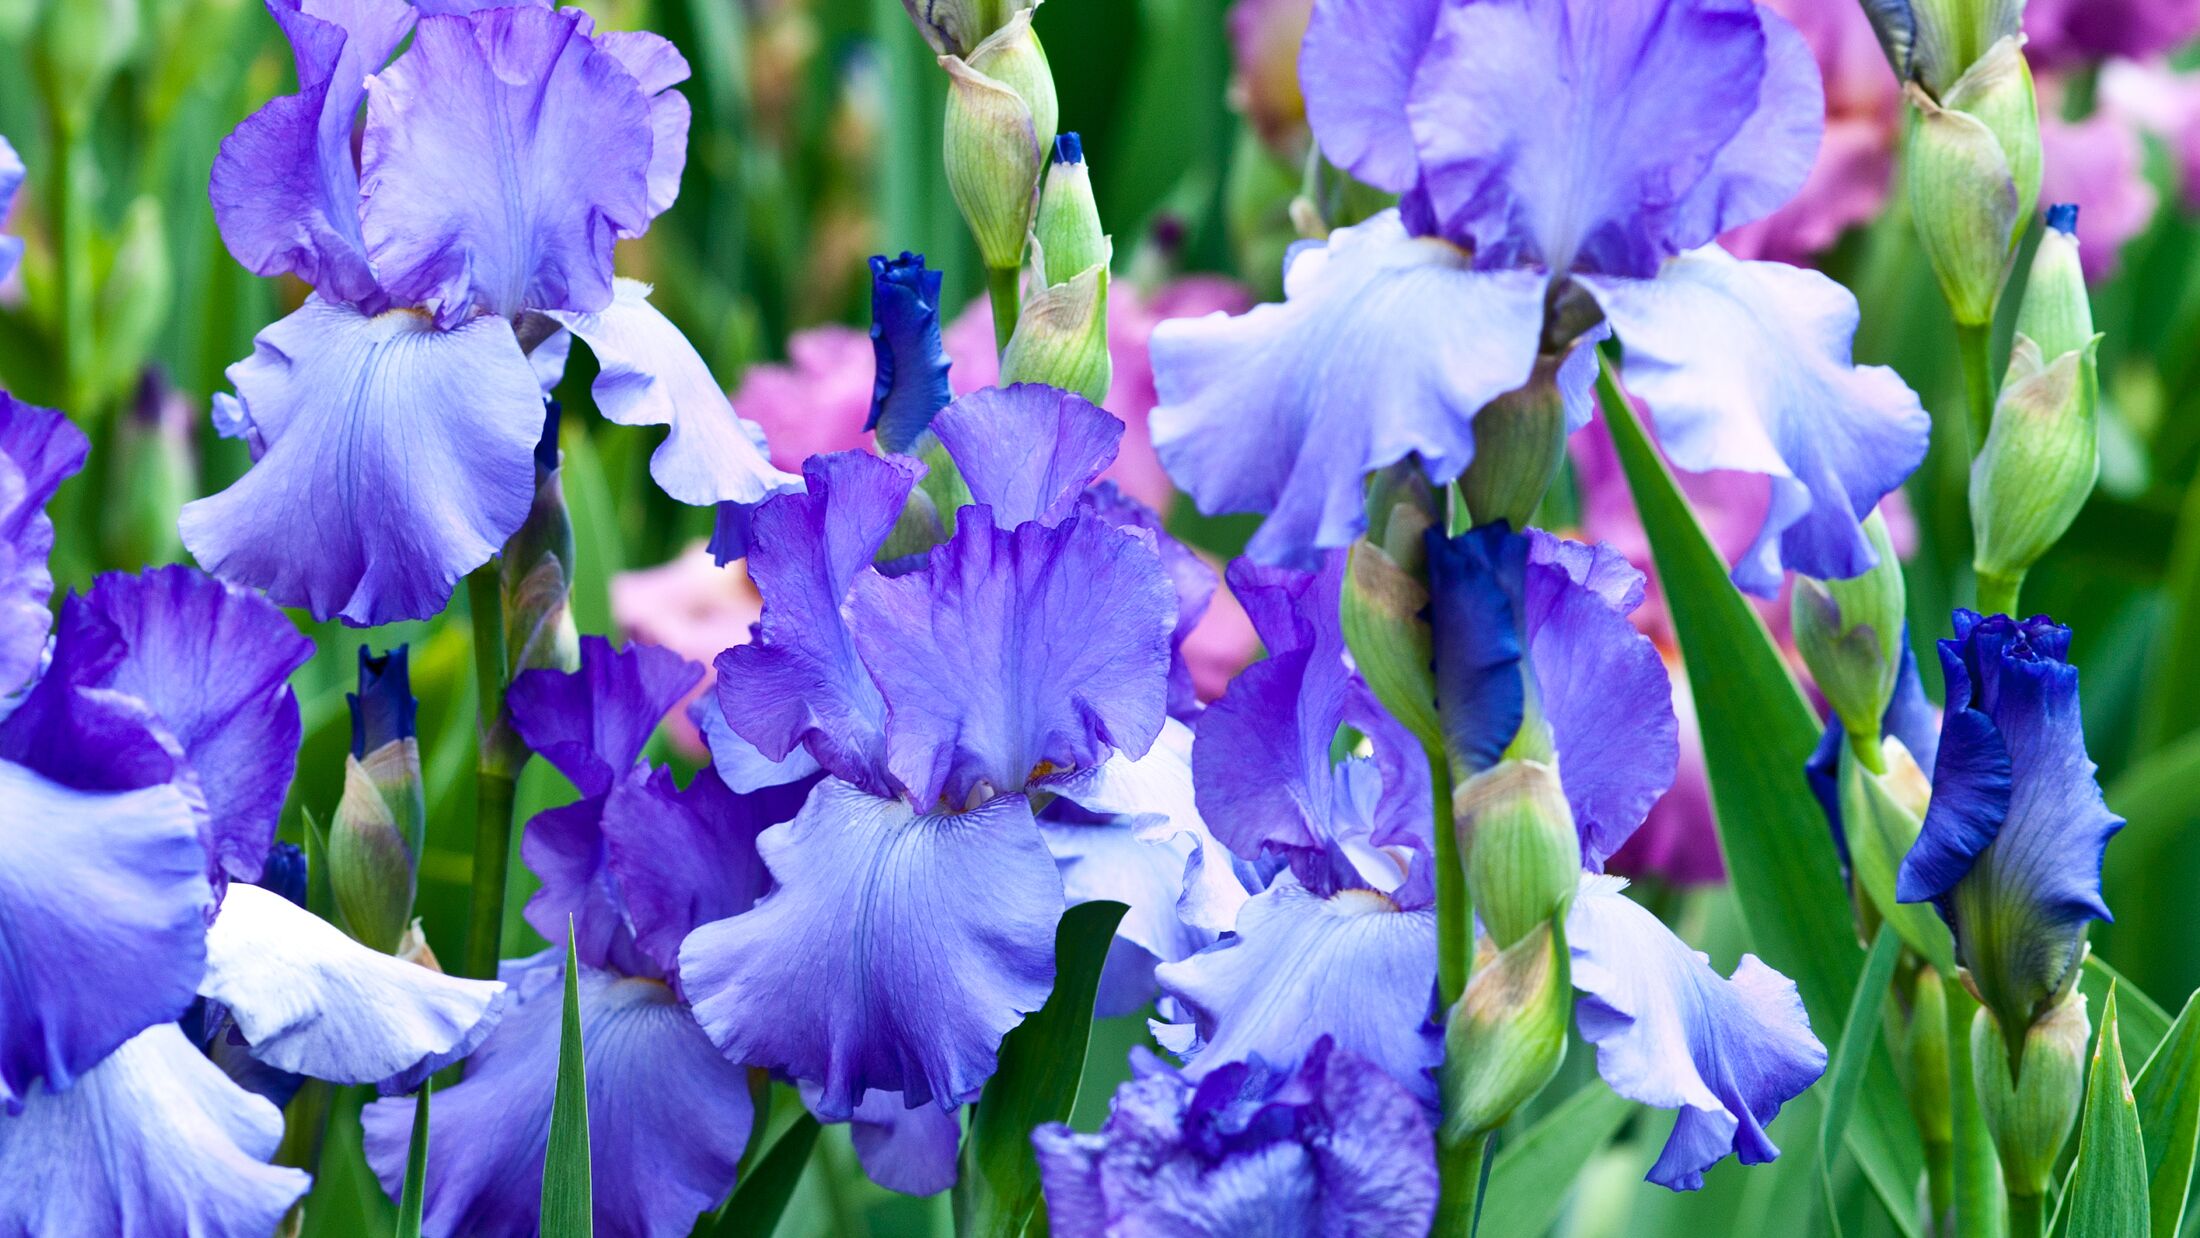 blue irises blossoming in a garden, Giardino dell' Iris in Florence, Italy